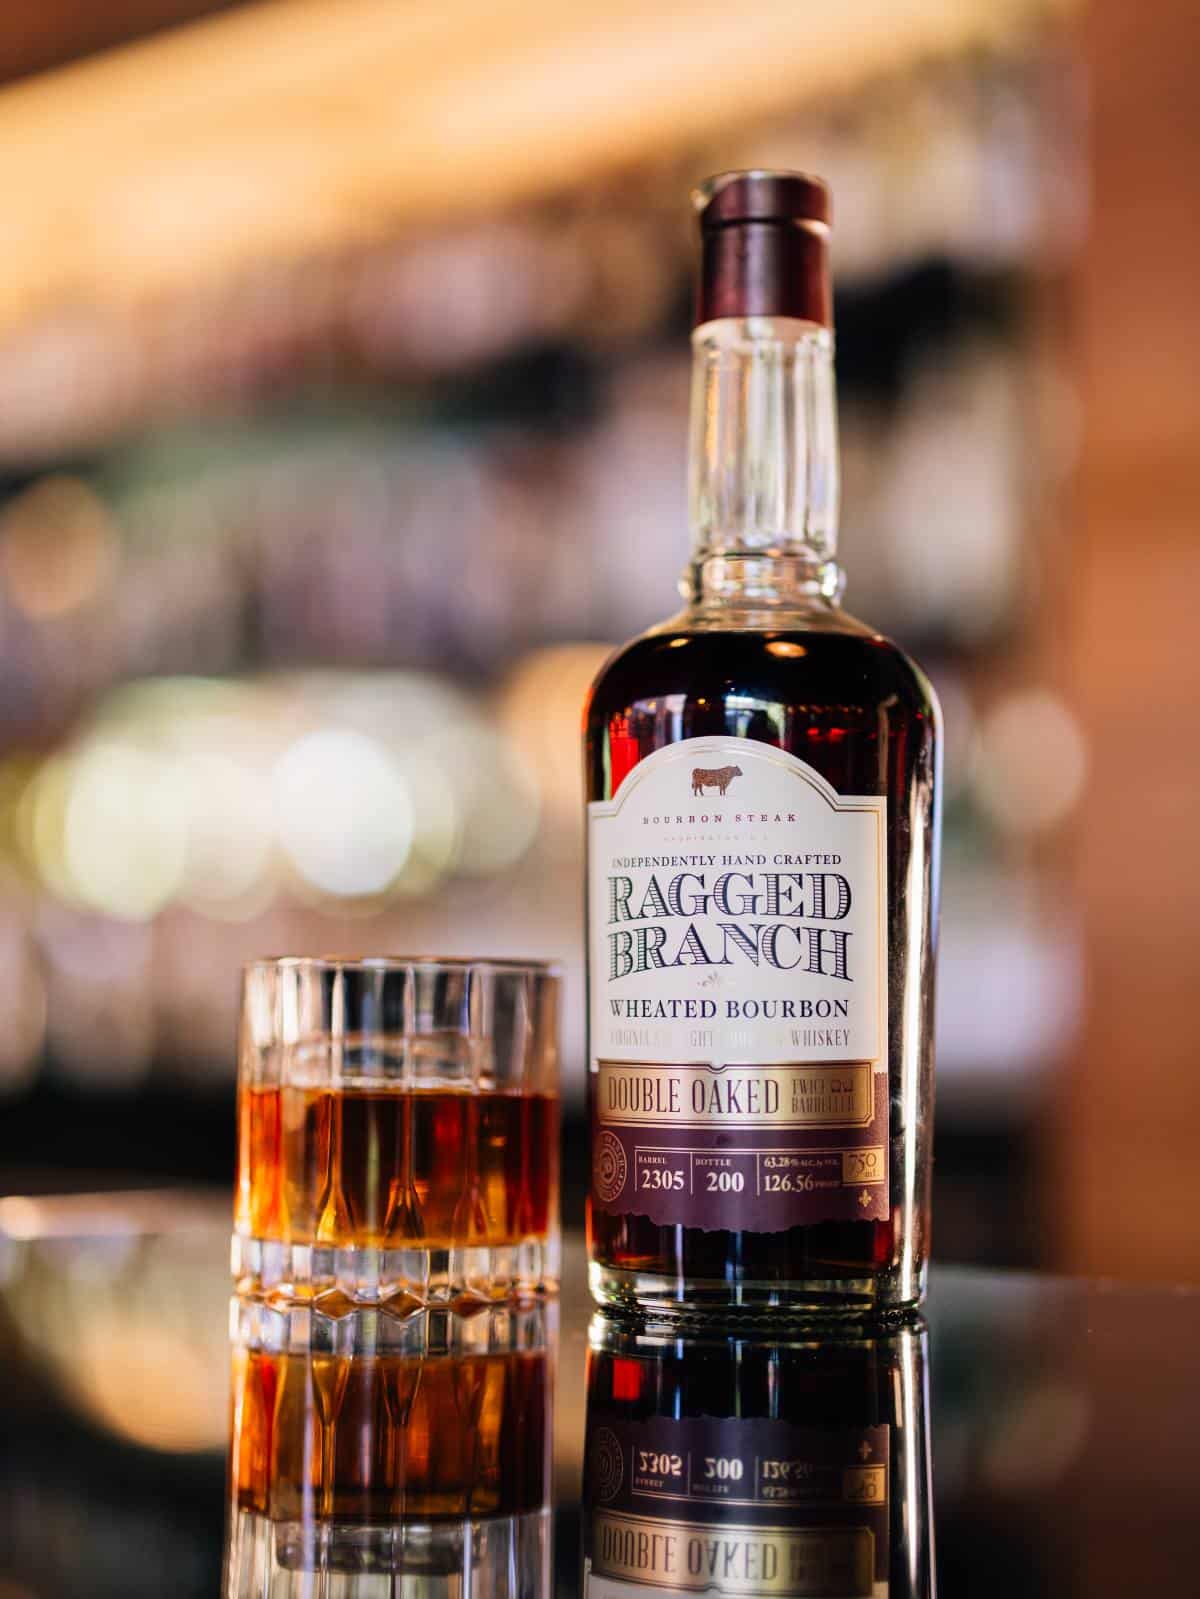 Ragged Branch Double Oaked Bourbon Steak featured